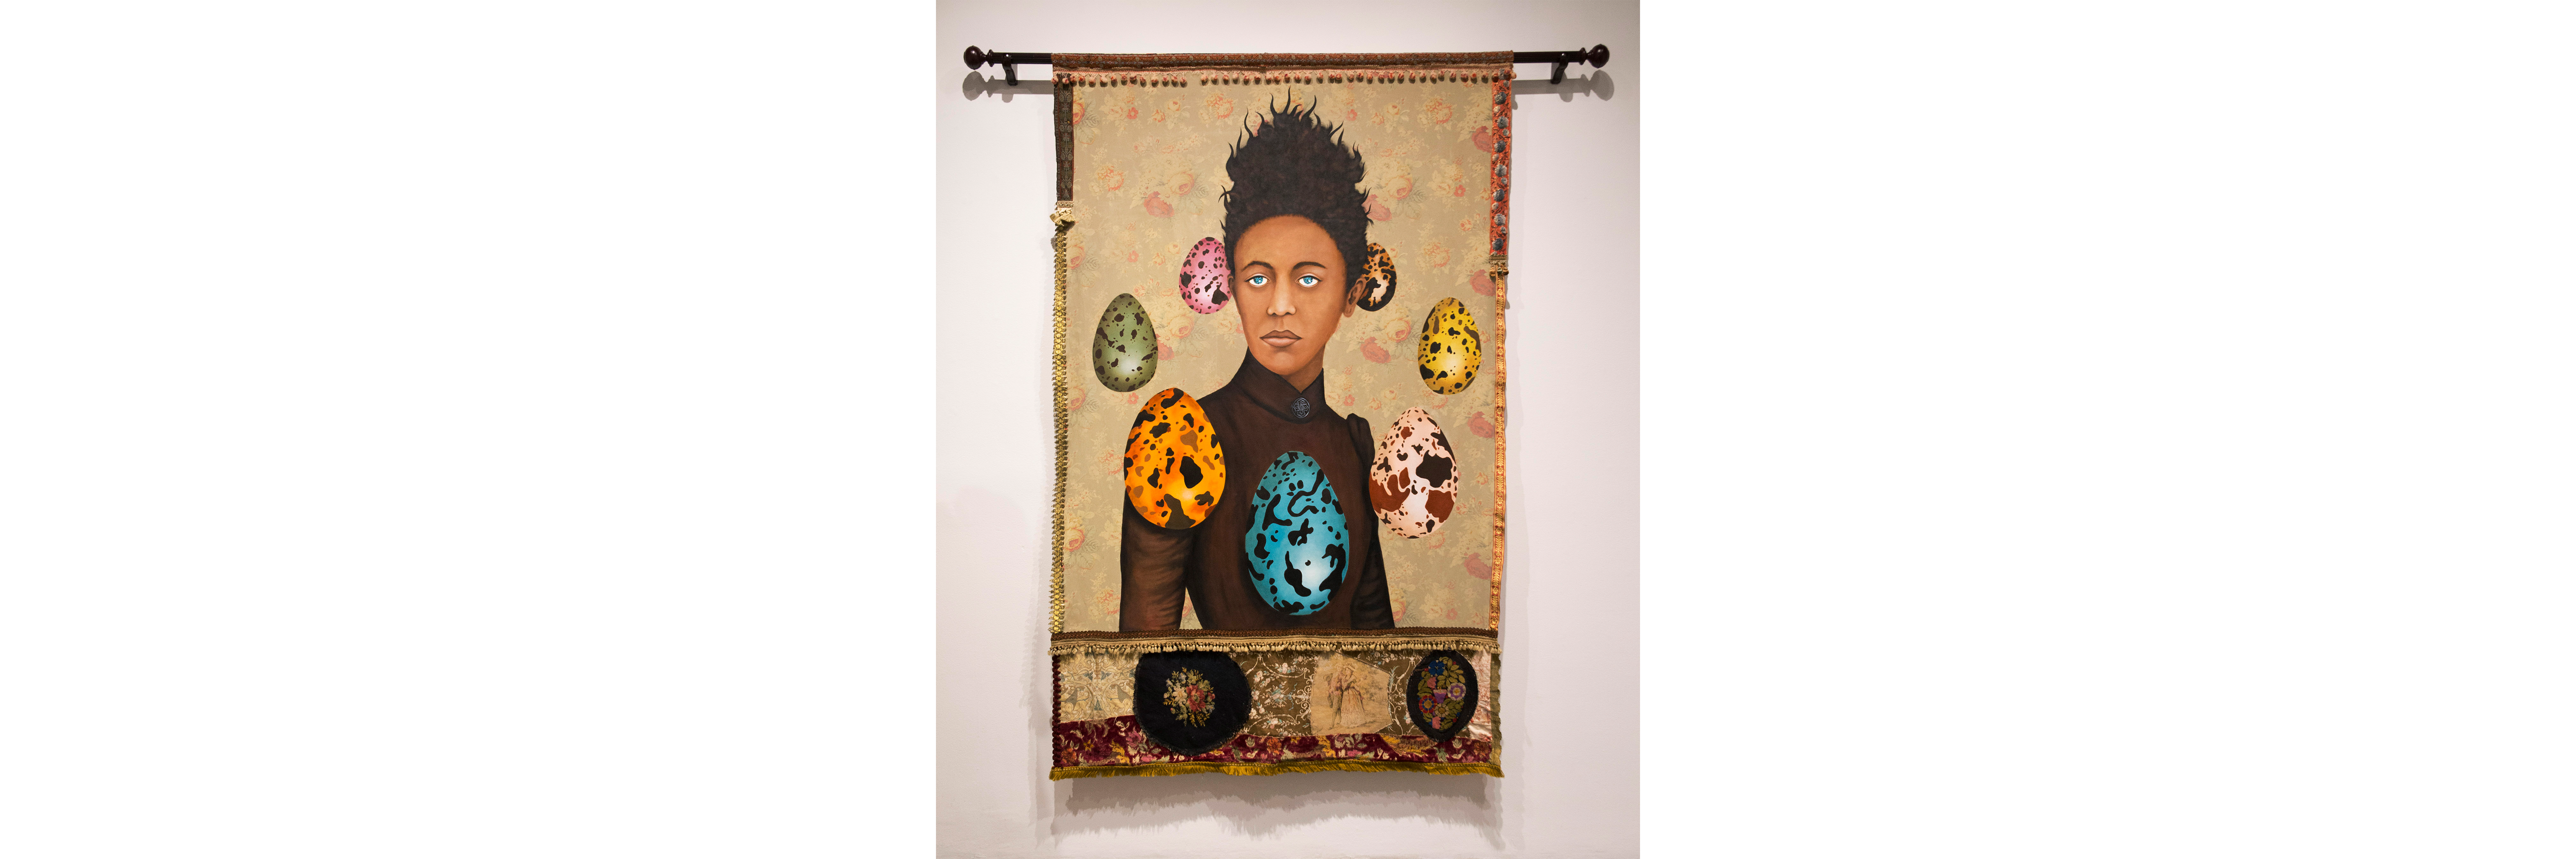 Lezley Saar, Septime, a collector of breezes, hoarder of voices, and gatherer of olfactory ephemera, once hanged her lover into a lake to protect him., 2019. Acrylic on fabric, embellishments, curtain rod, 89 x 76 inches. Collection of Diane Allen. 